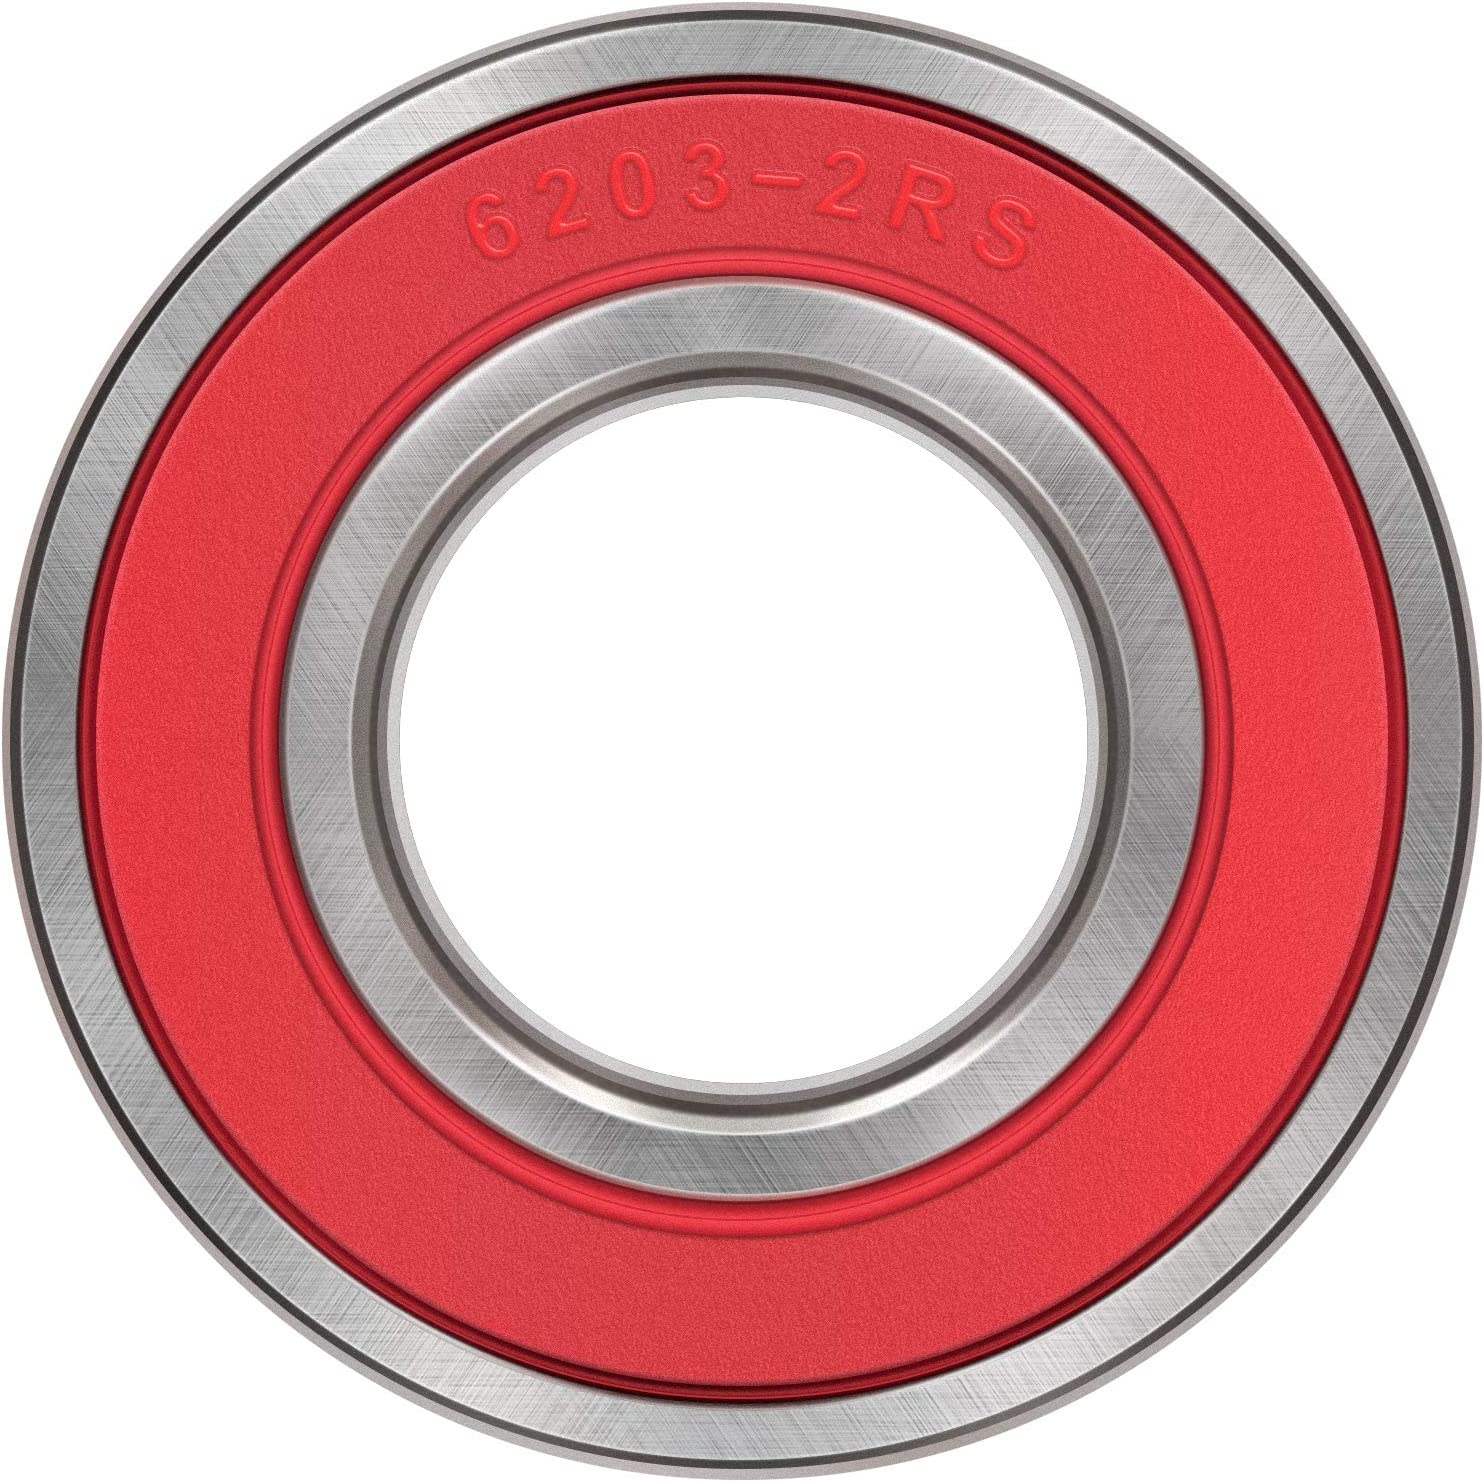 6203 2rs Deep Groove Ball Bearing for Garden Machinery,Electric Toys and Tool 6203zz 17*40*12mm